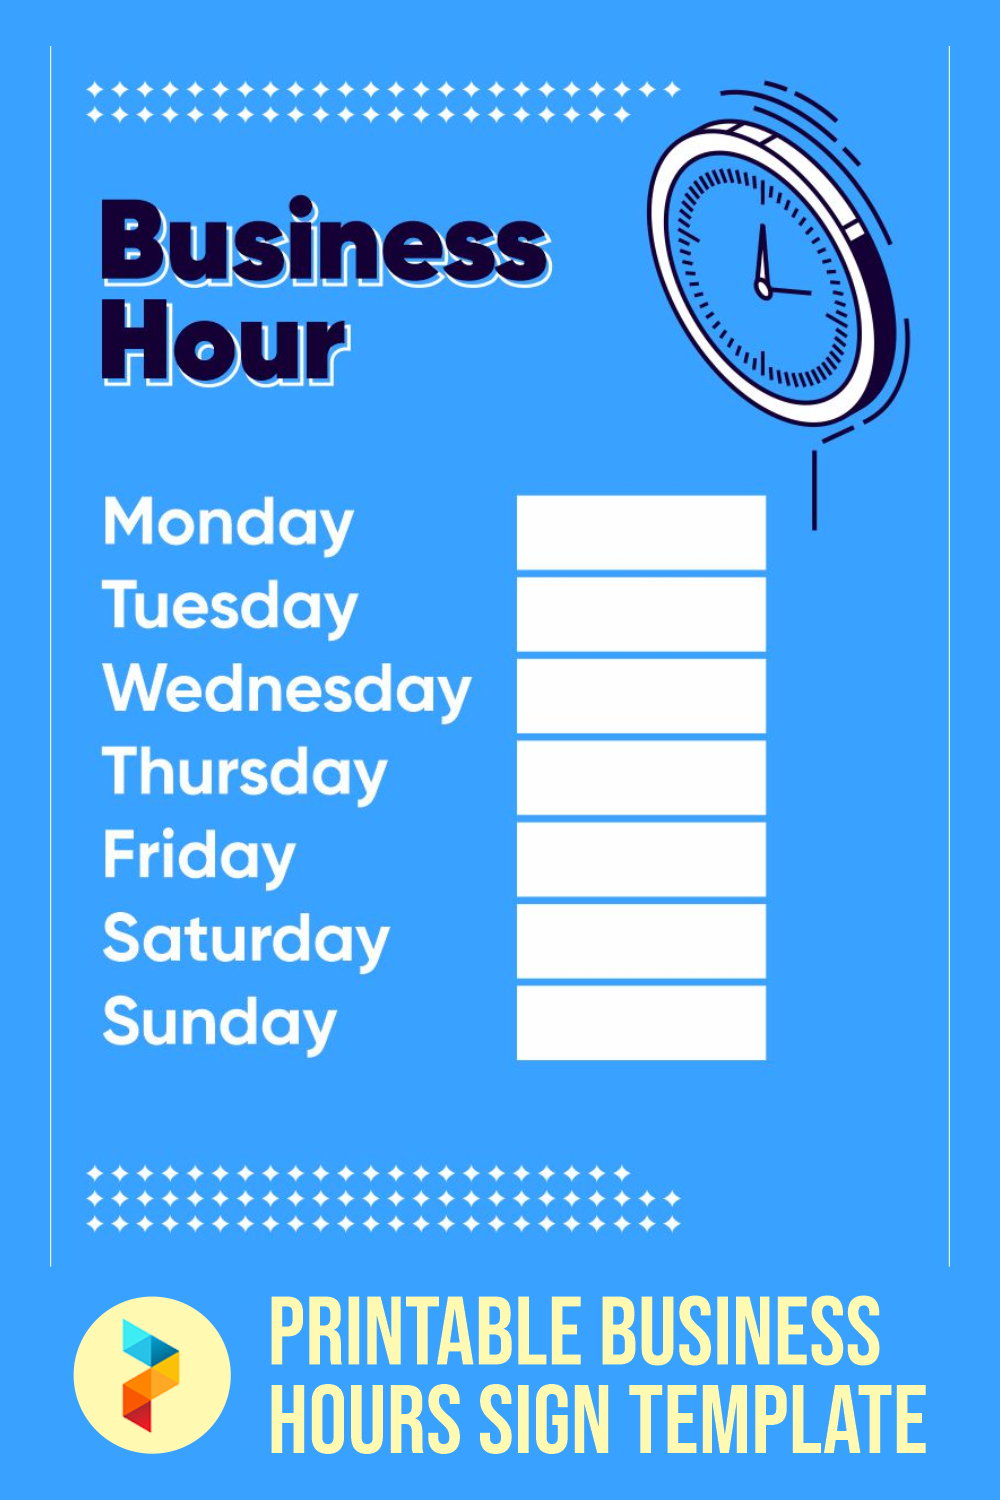 23 Best Free Printable Business Hours Sign Template - printablee.com Inside Printable Business Hours Sign Template